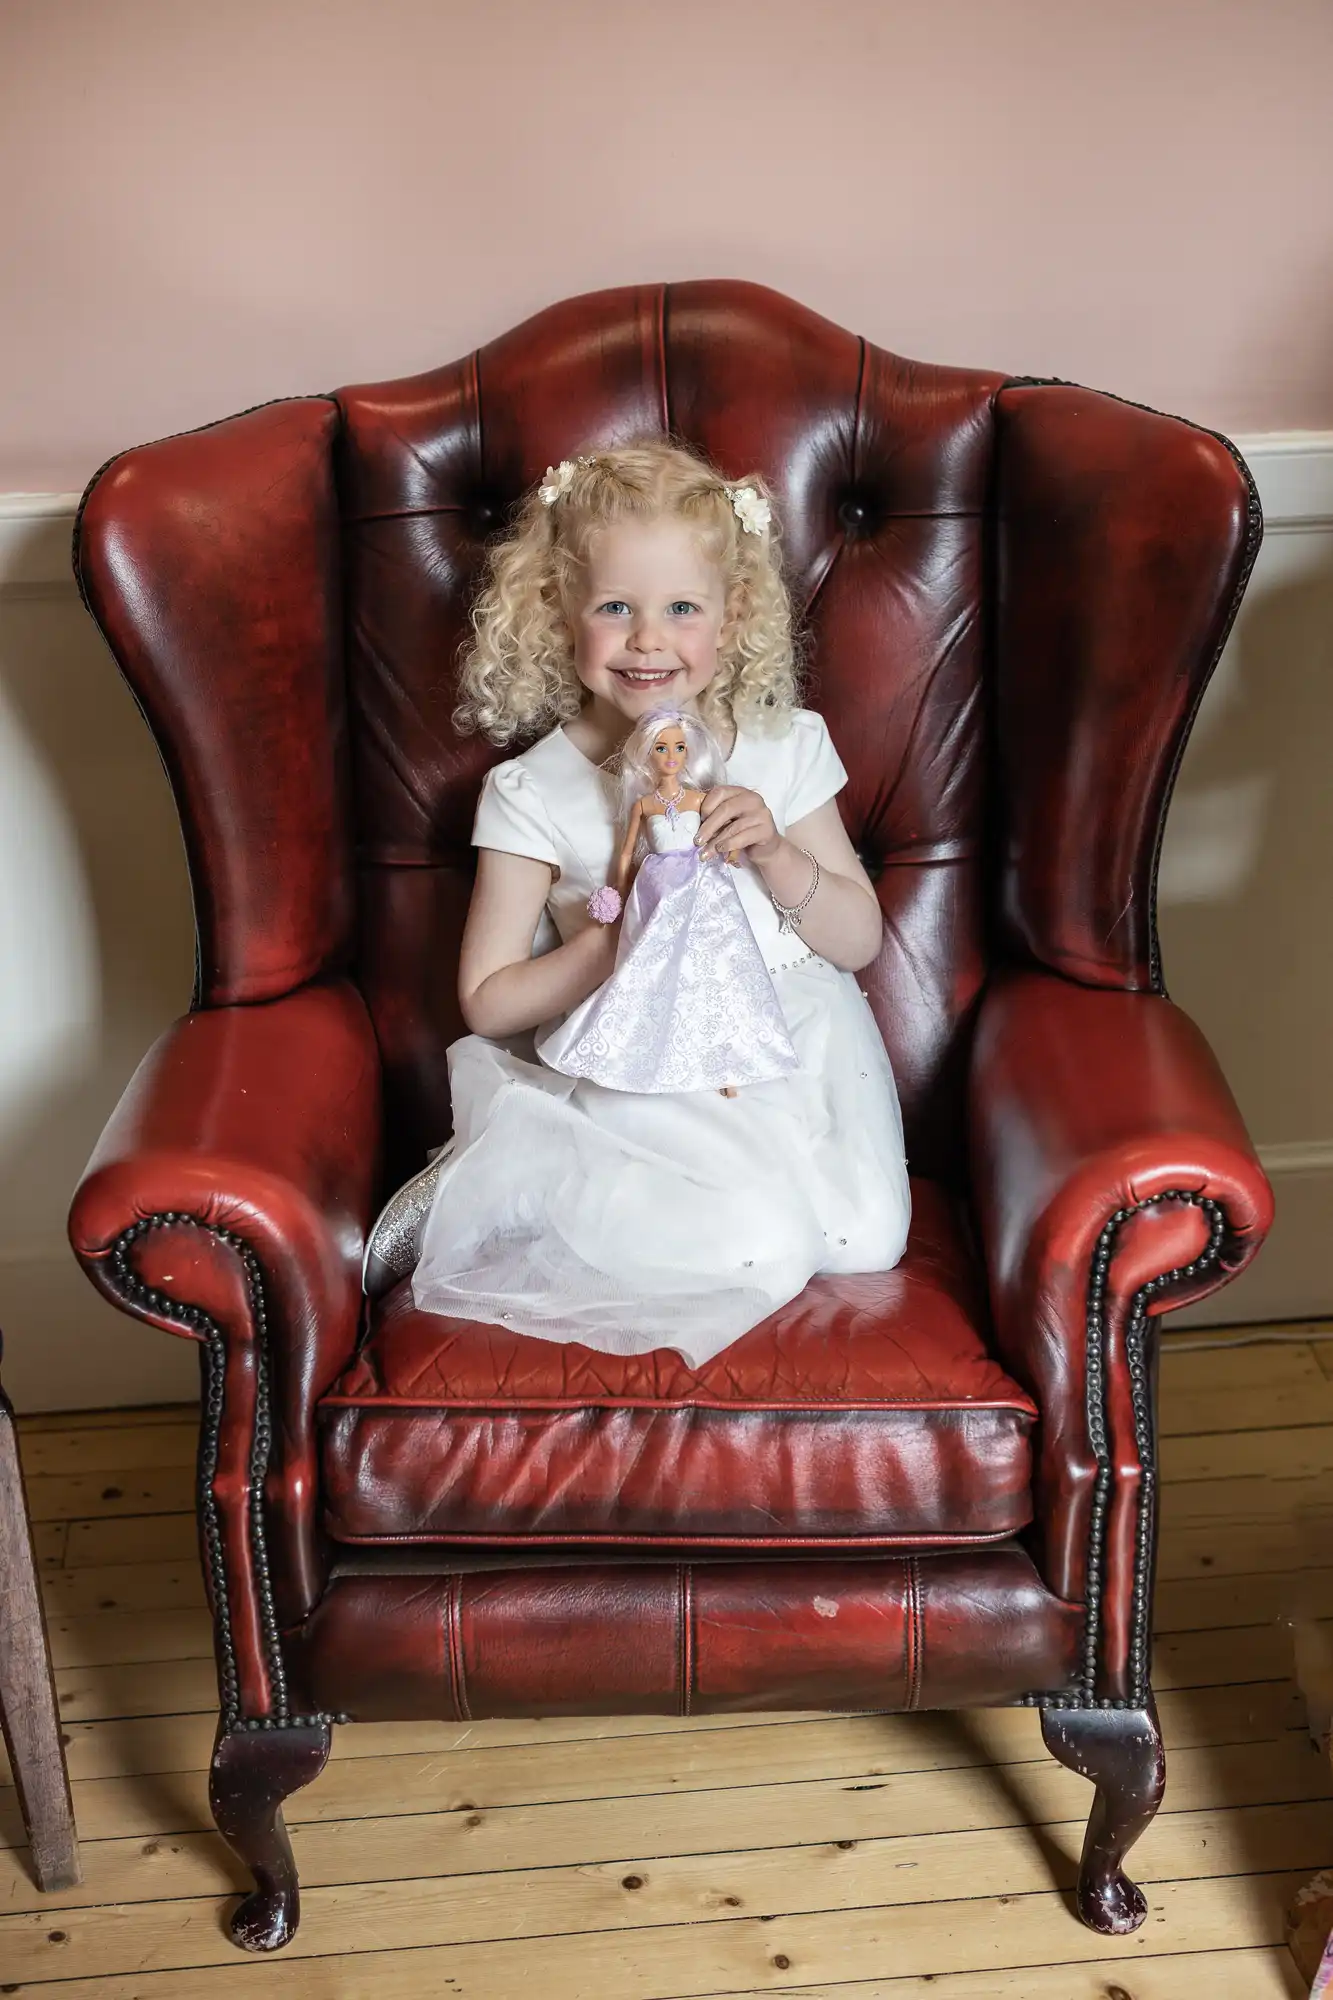 A young girl with curly blond hair sits on a large red leather armchair, holding a doll and smiling at the camera. She is wearing a white dress.